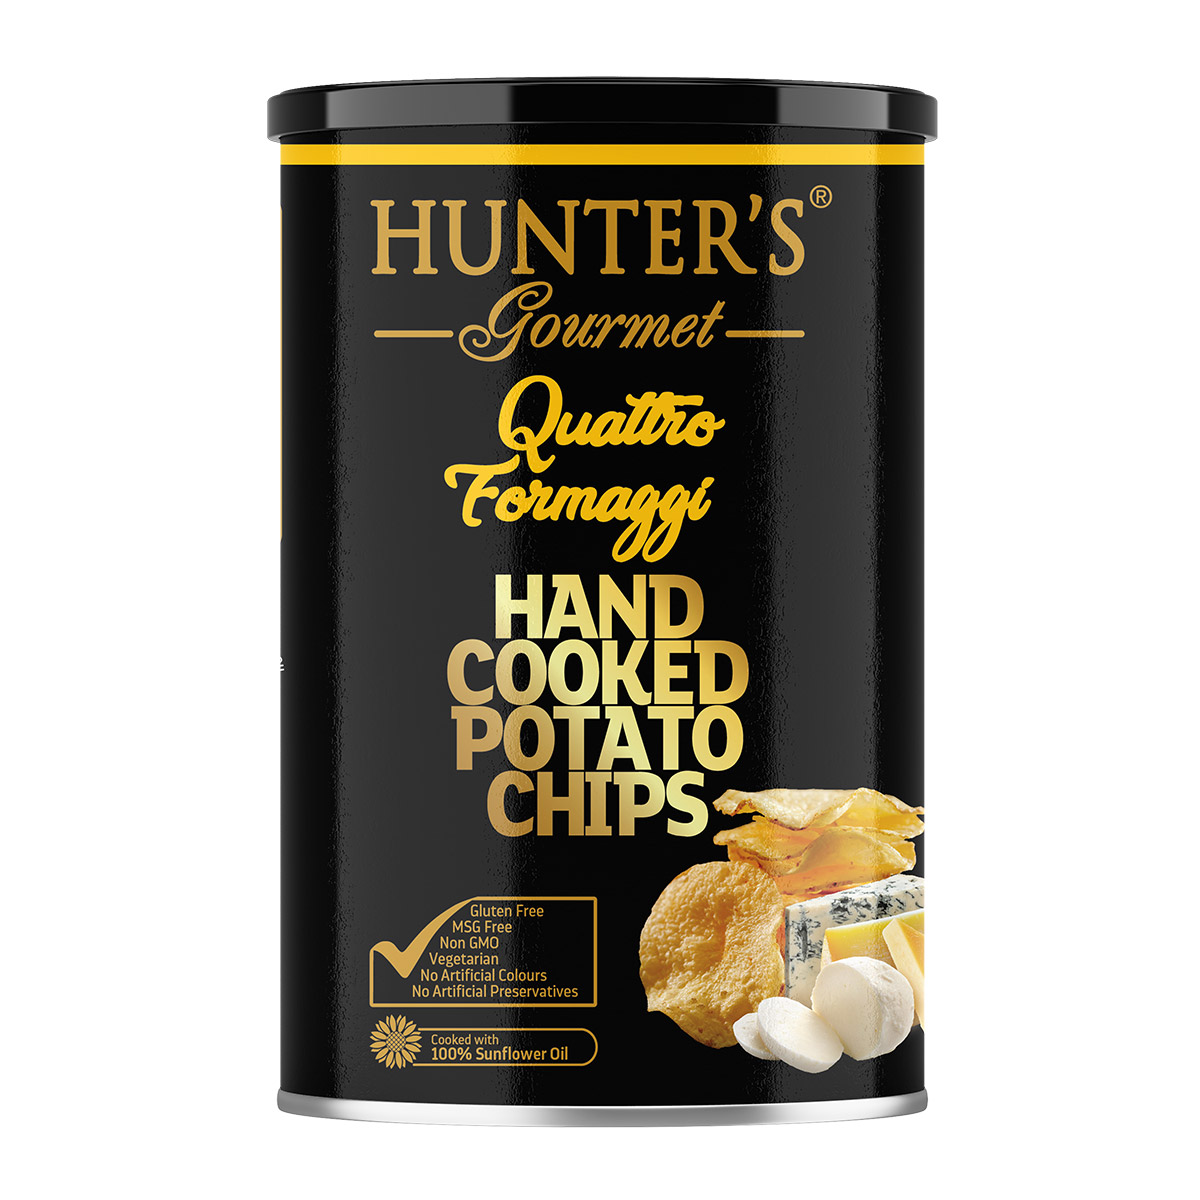 Hunter’s Gourmet Hand Cooked Potato Chips – Quattro Formaggi – Gold Edition (125gm)